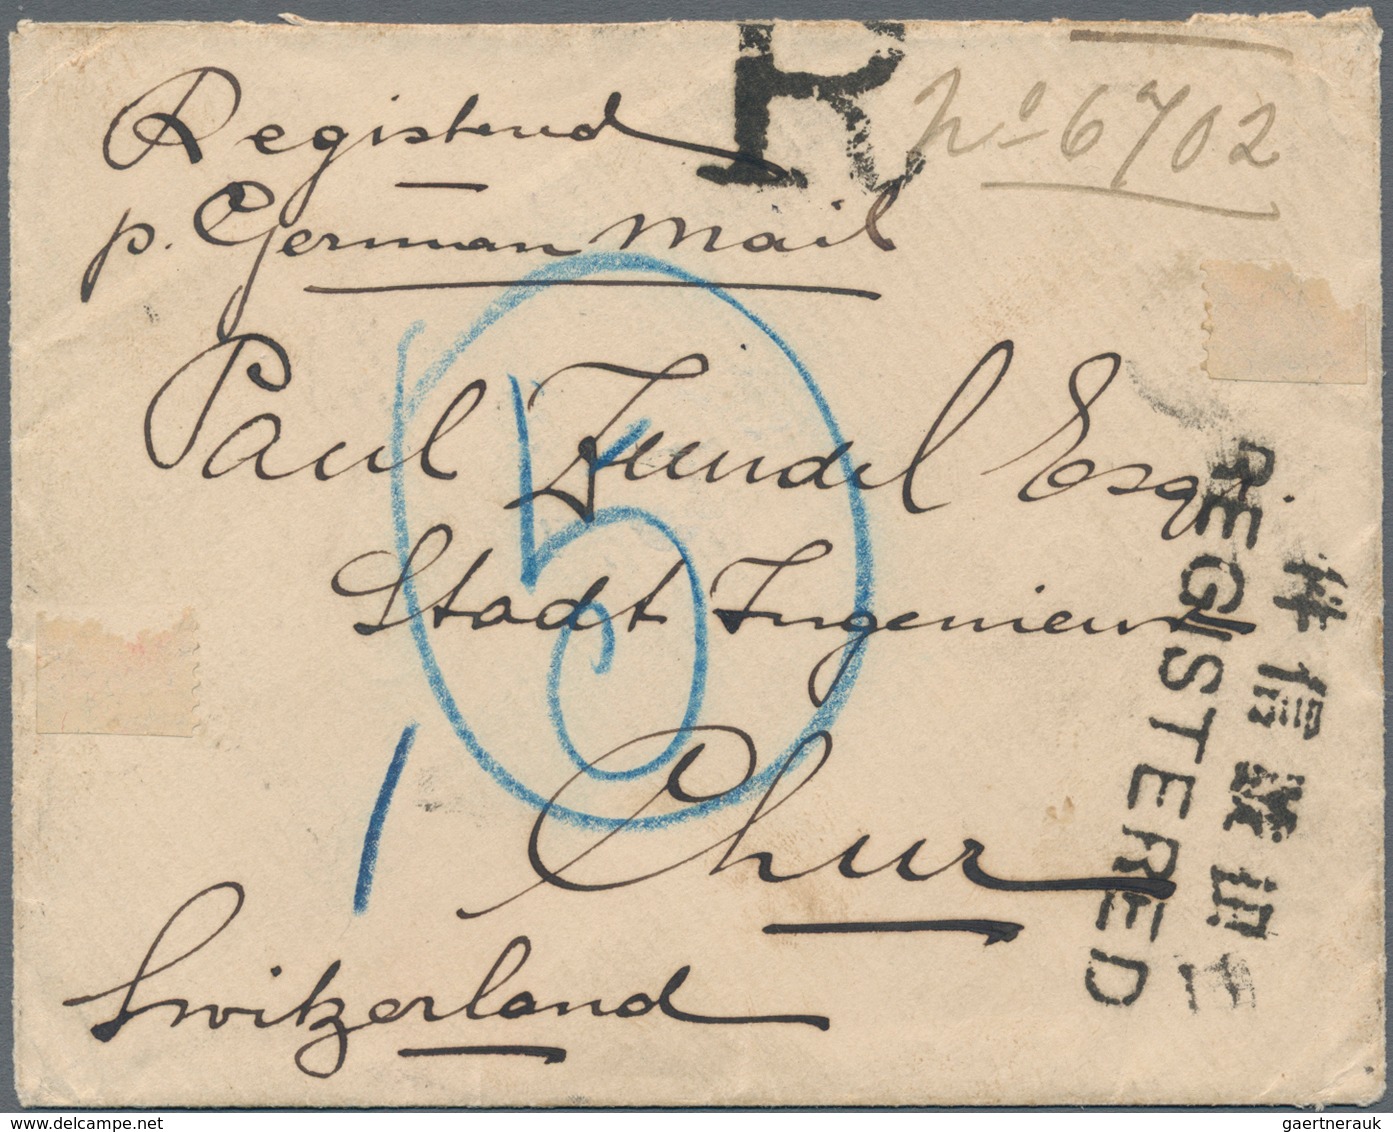 China: 1897/98, Small Figure Surcharge 1 C./1 Ca. Resp. 2 C./2 Ca. With Coiling Dragon 1/2 C., 1 C., - 1912-1949 República